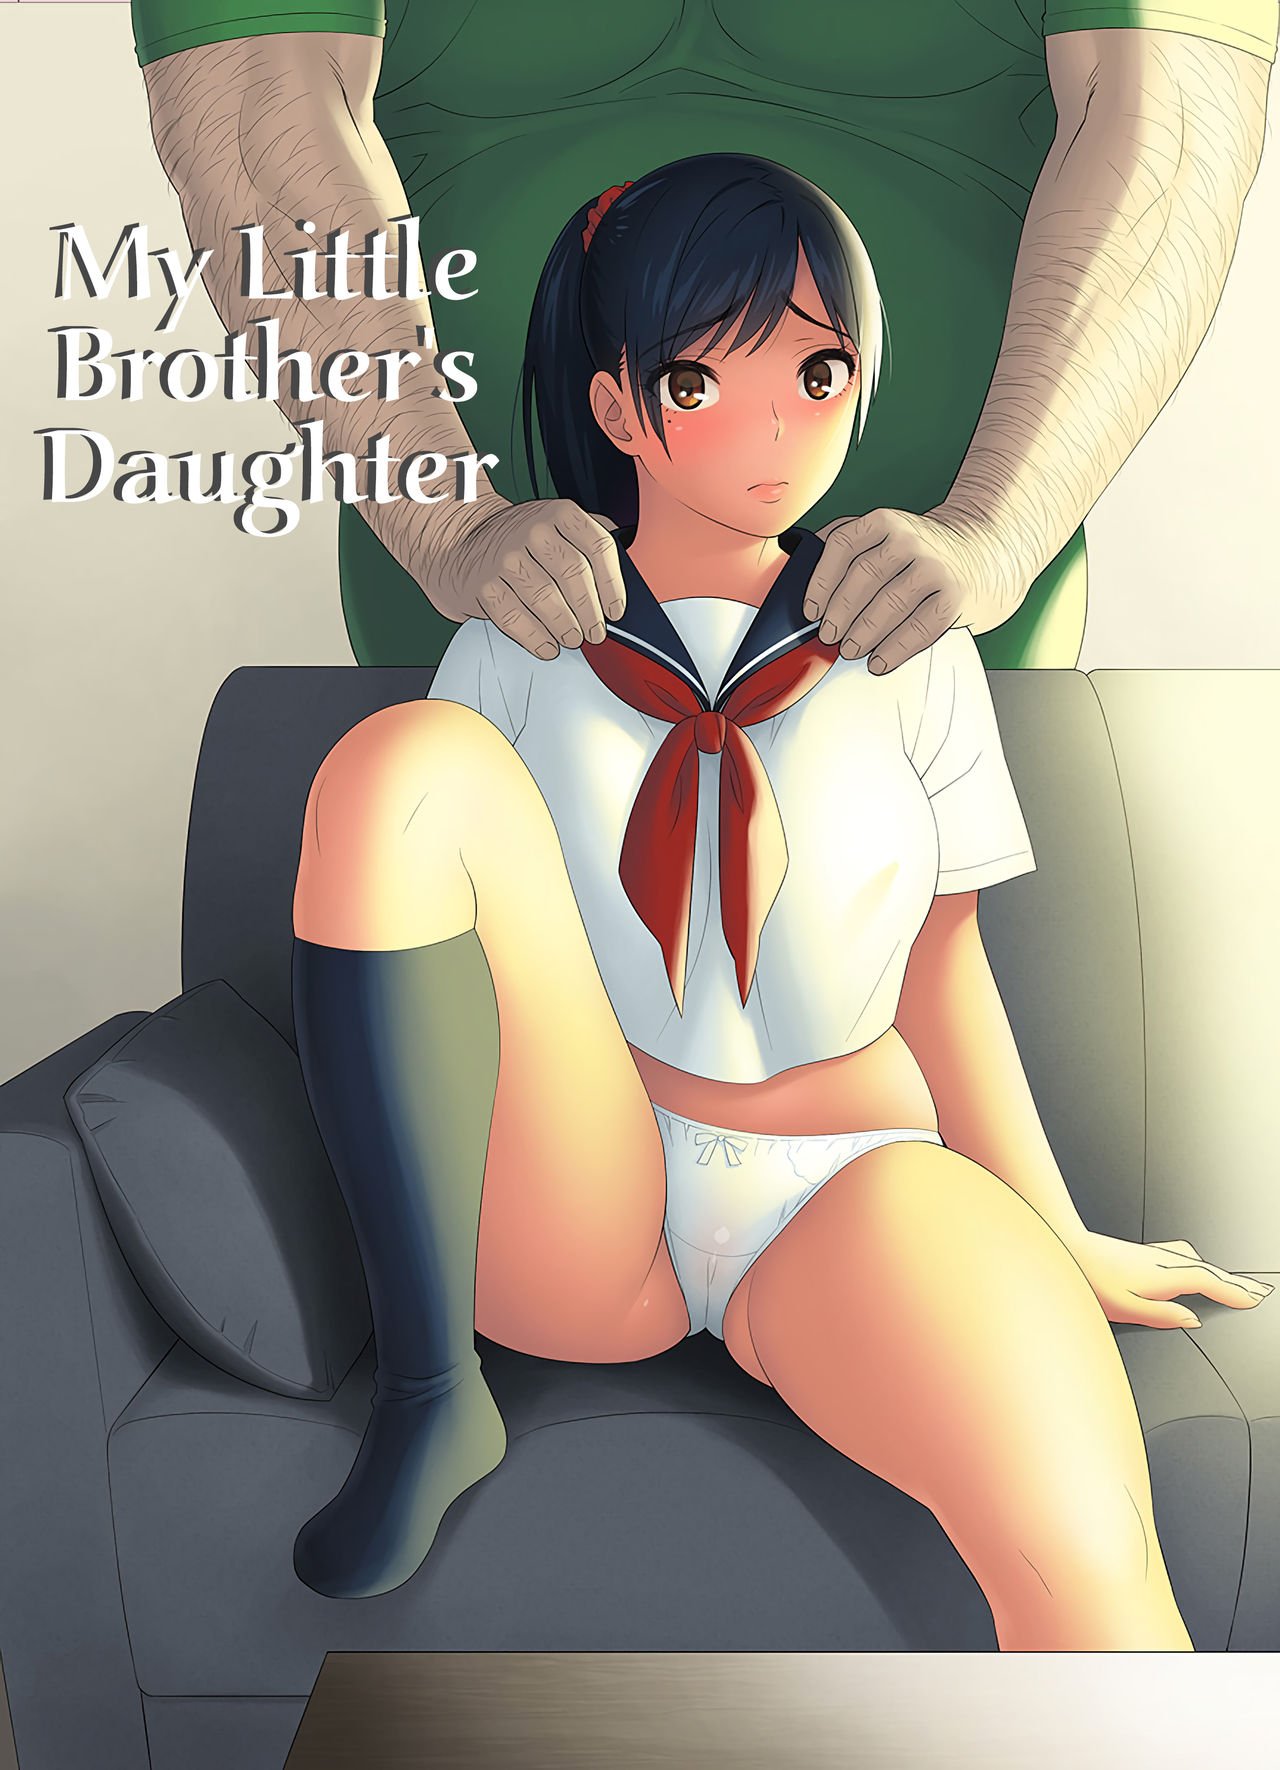 My Little Brother's Daughter [Jingrock] - 1 . My Little Brother's Daughter  - Chapter 1 [Jingrock] - AllPornComic